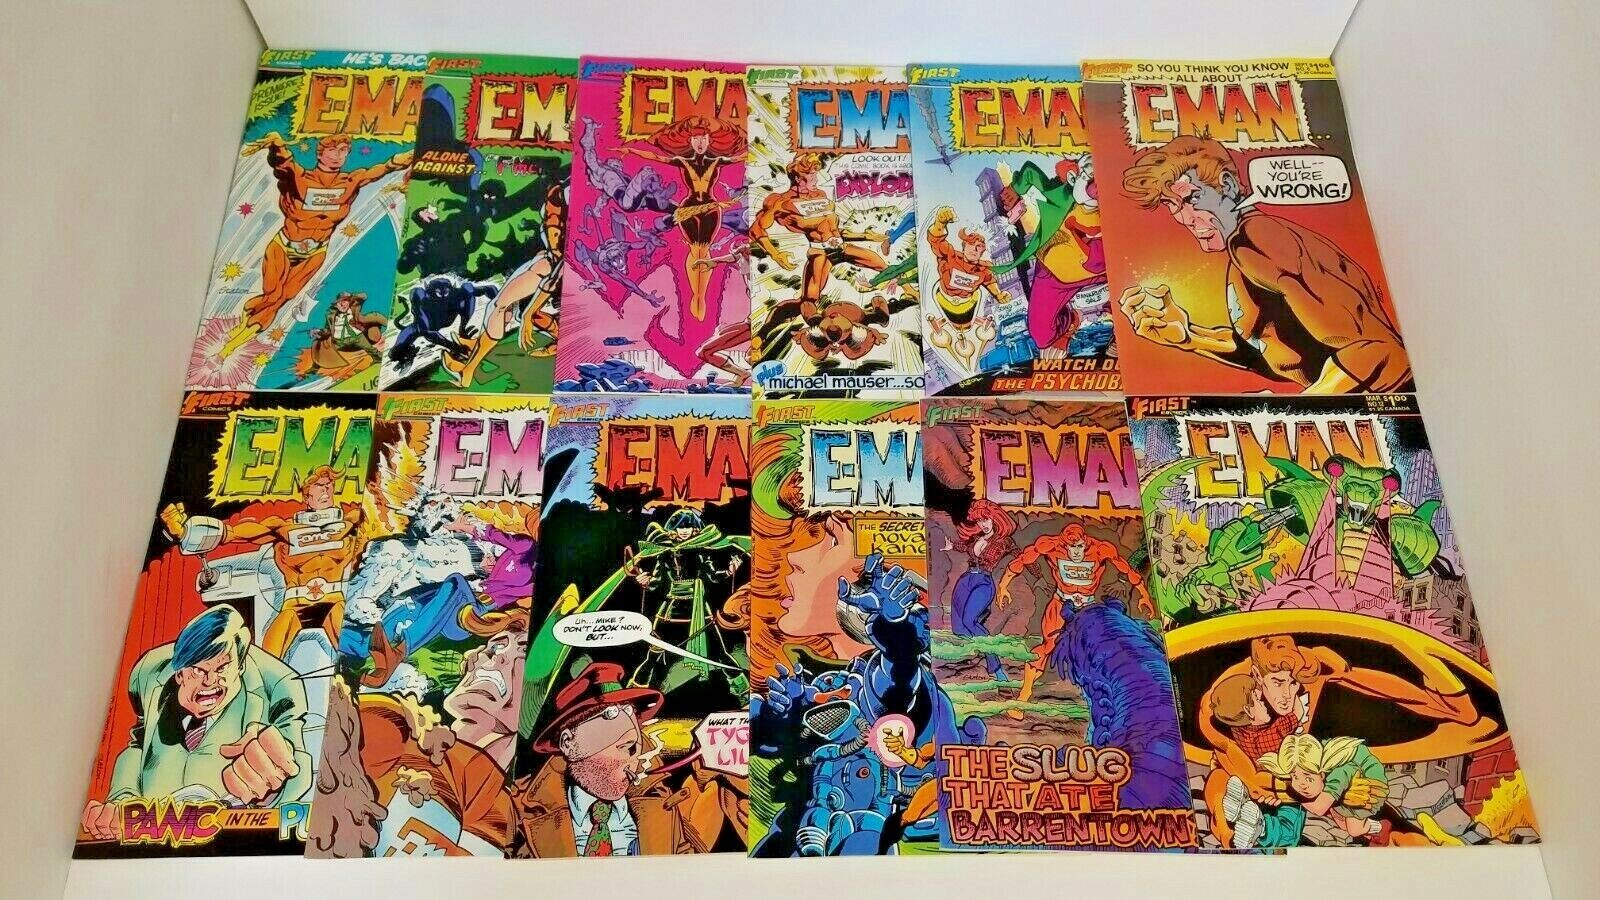 E-MAN COMICS (1983) 25 ISSUE COMPLETE SET 1-25 FIRST PUBLISHING